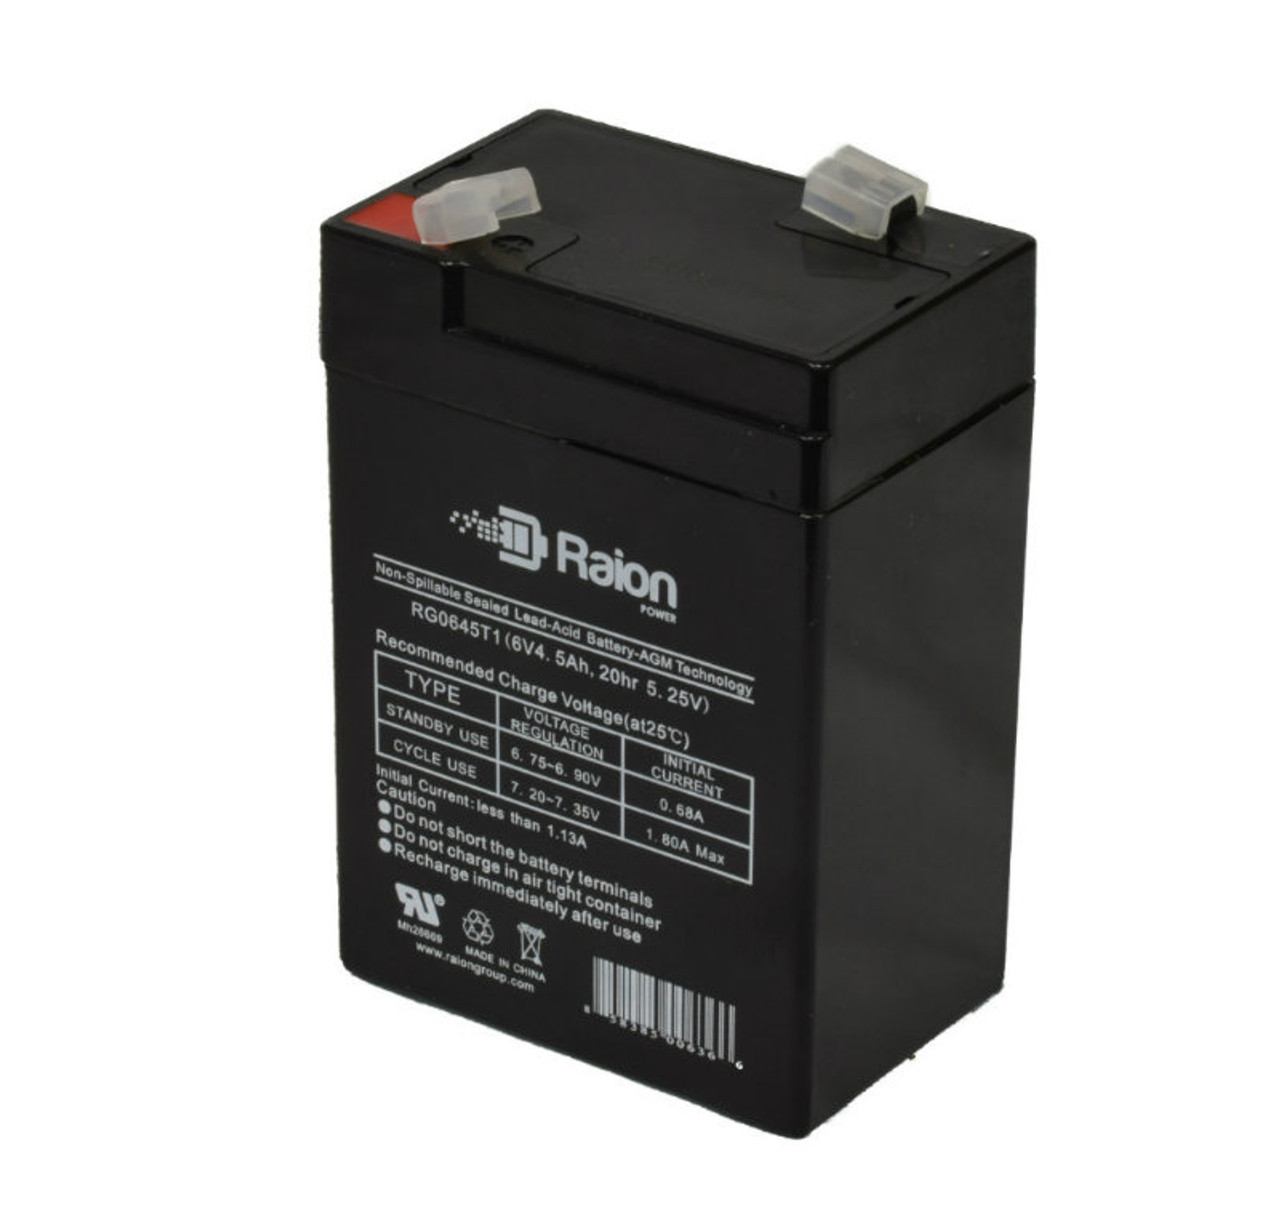 Raion Power RG0645T1 6V 4.5Ah Replacement Battery Cartridge for Baxter Healthcare Ericsson Stat Meter SM02